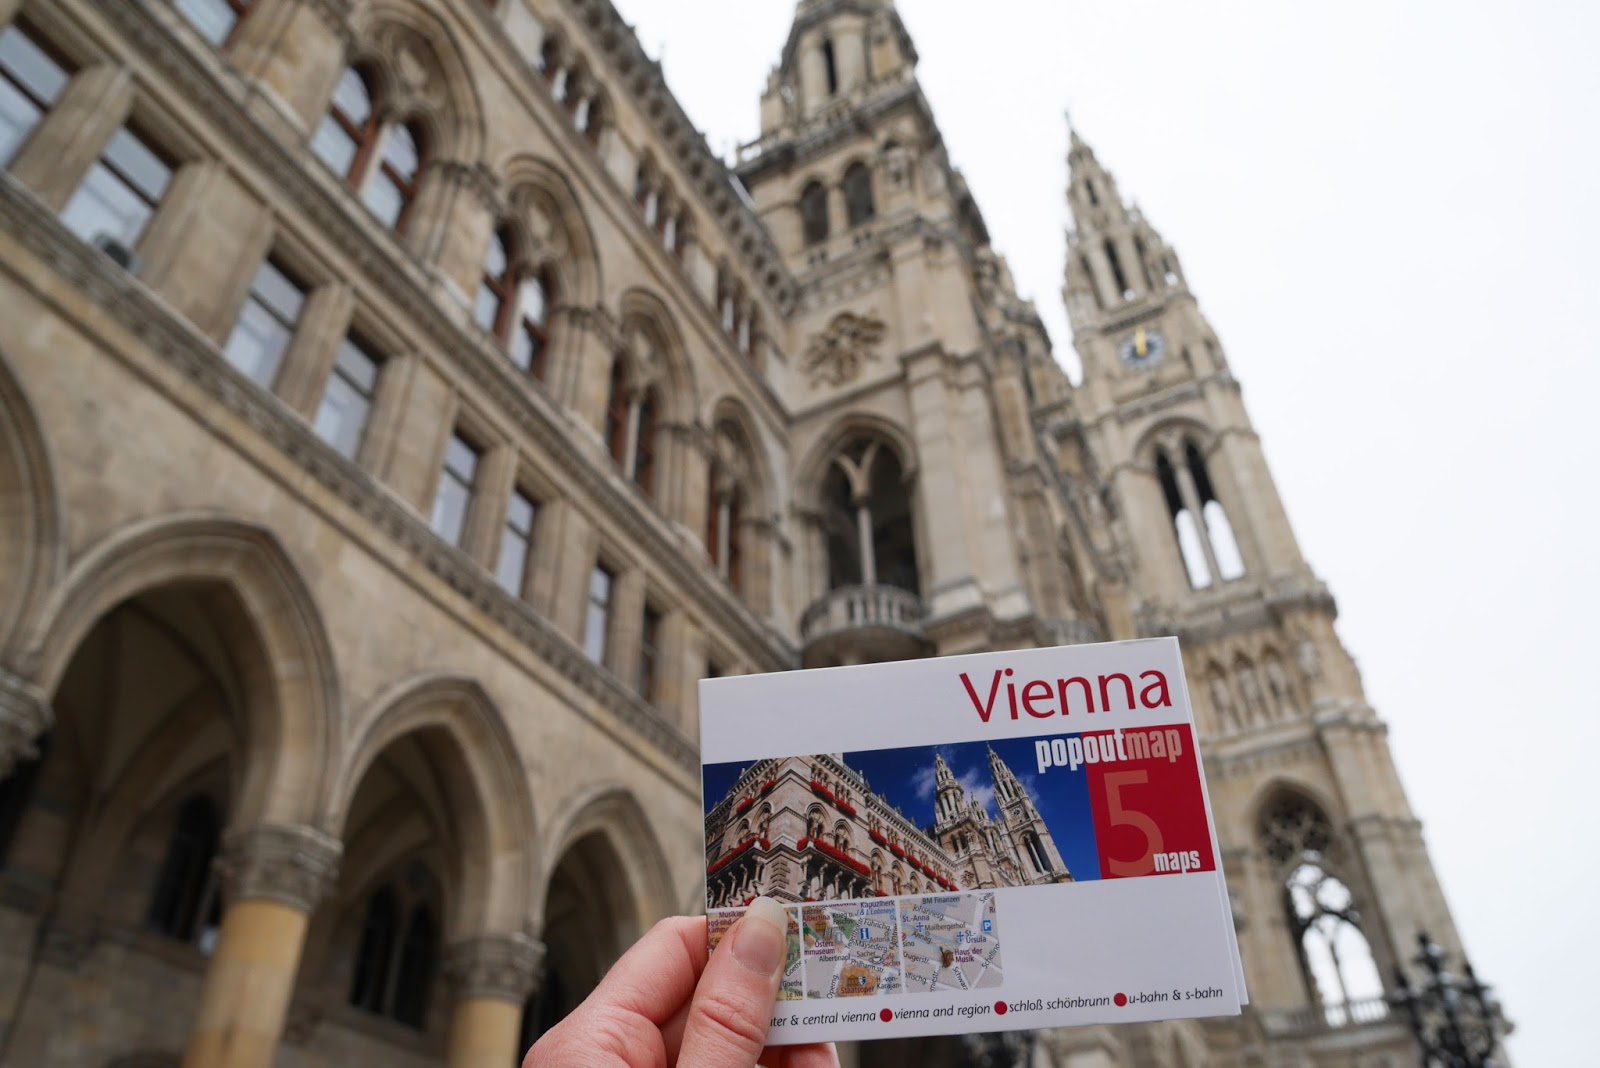 Vienna Popout map outside the Rathaus (City Hall)